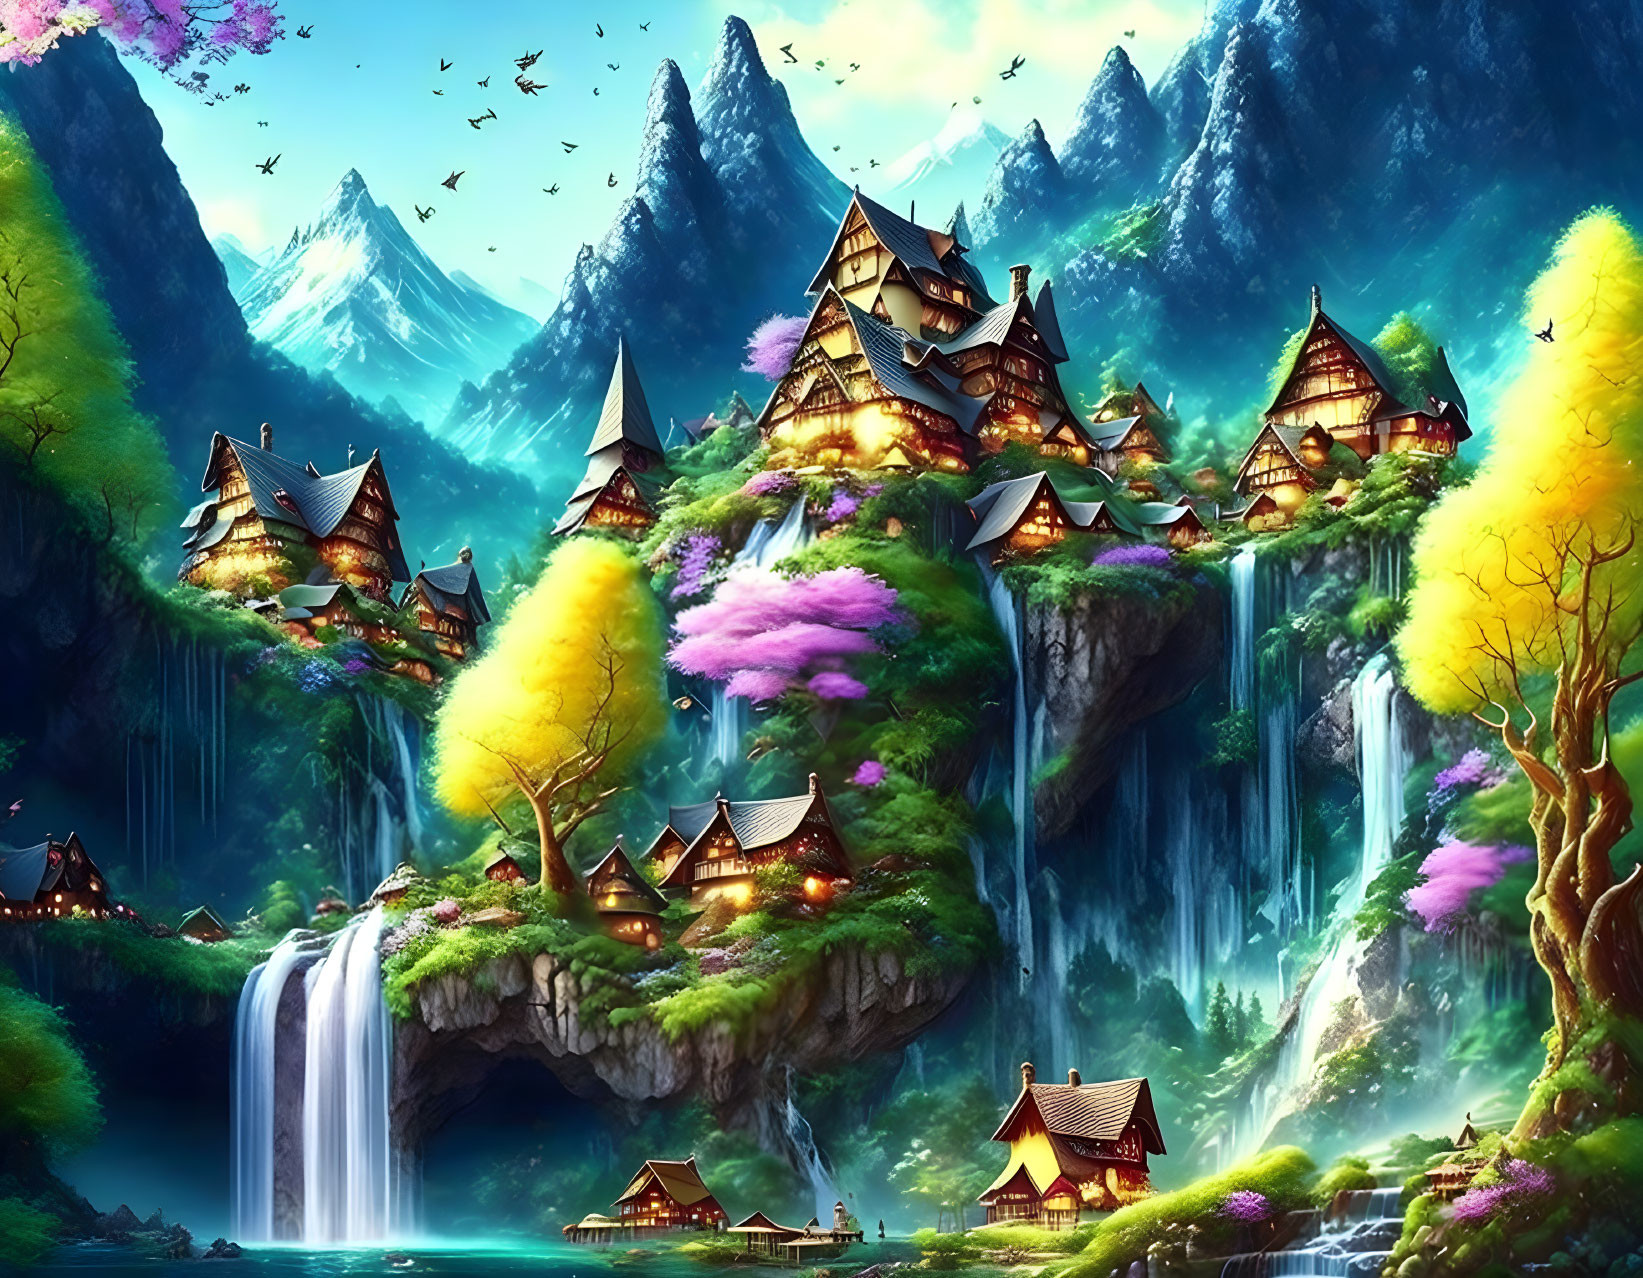 Colorful fantasy landscape with waterfalls, mountains, flora, houses, and birds.